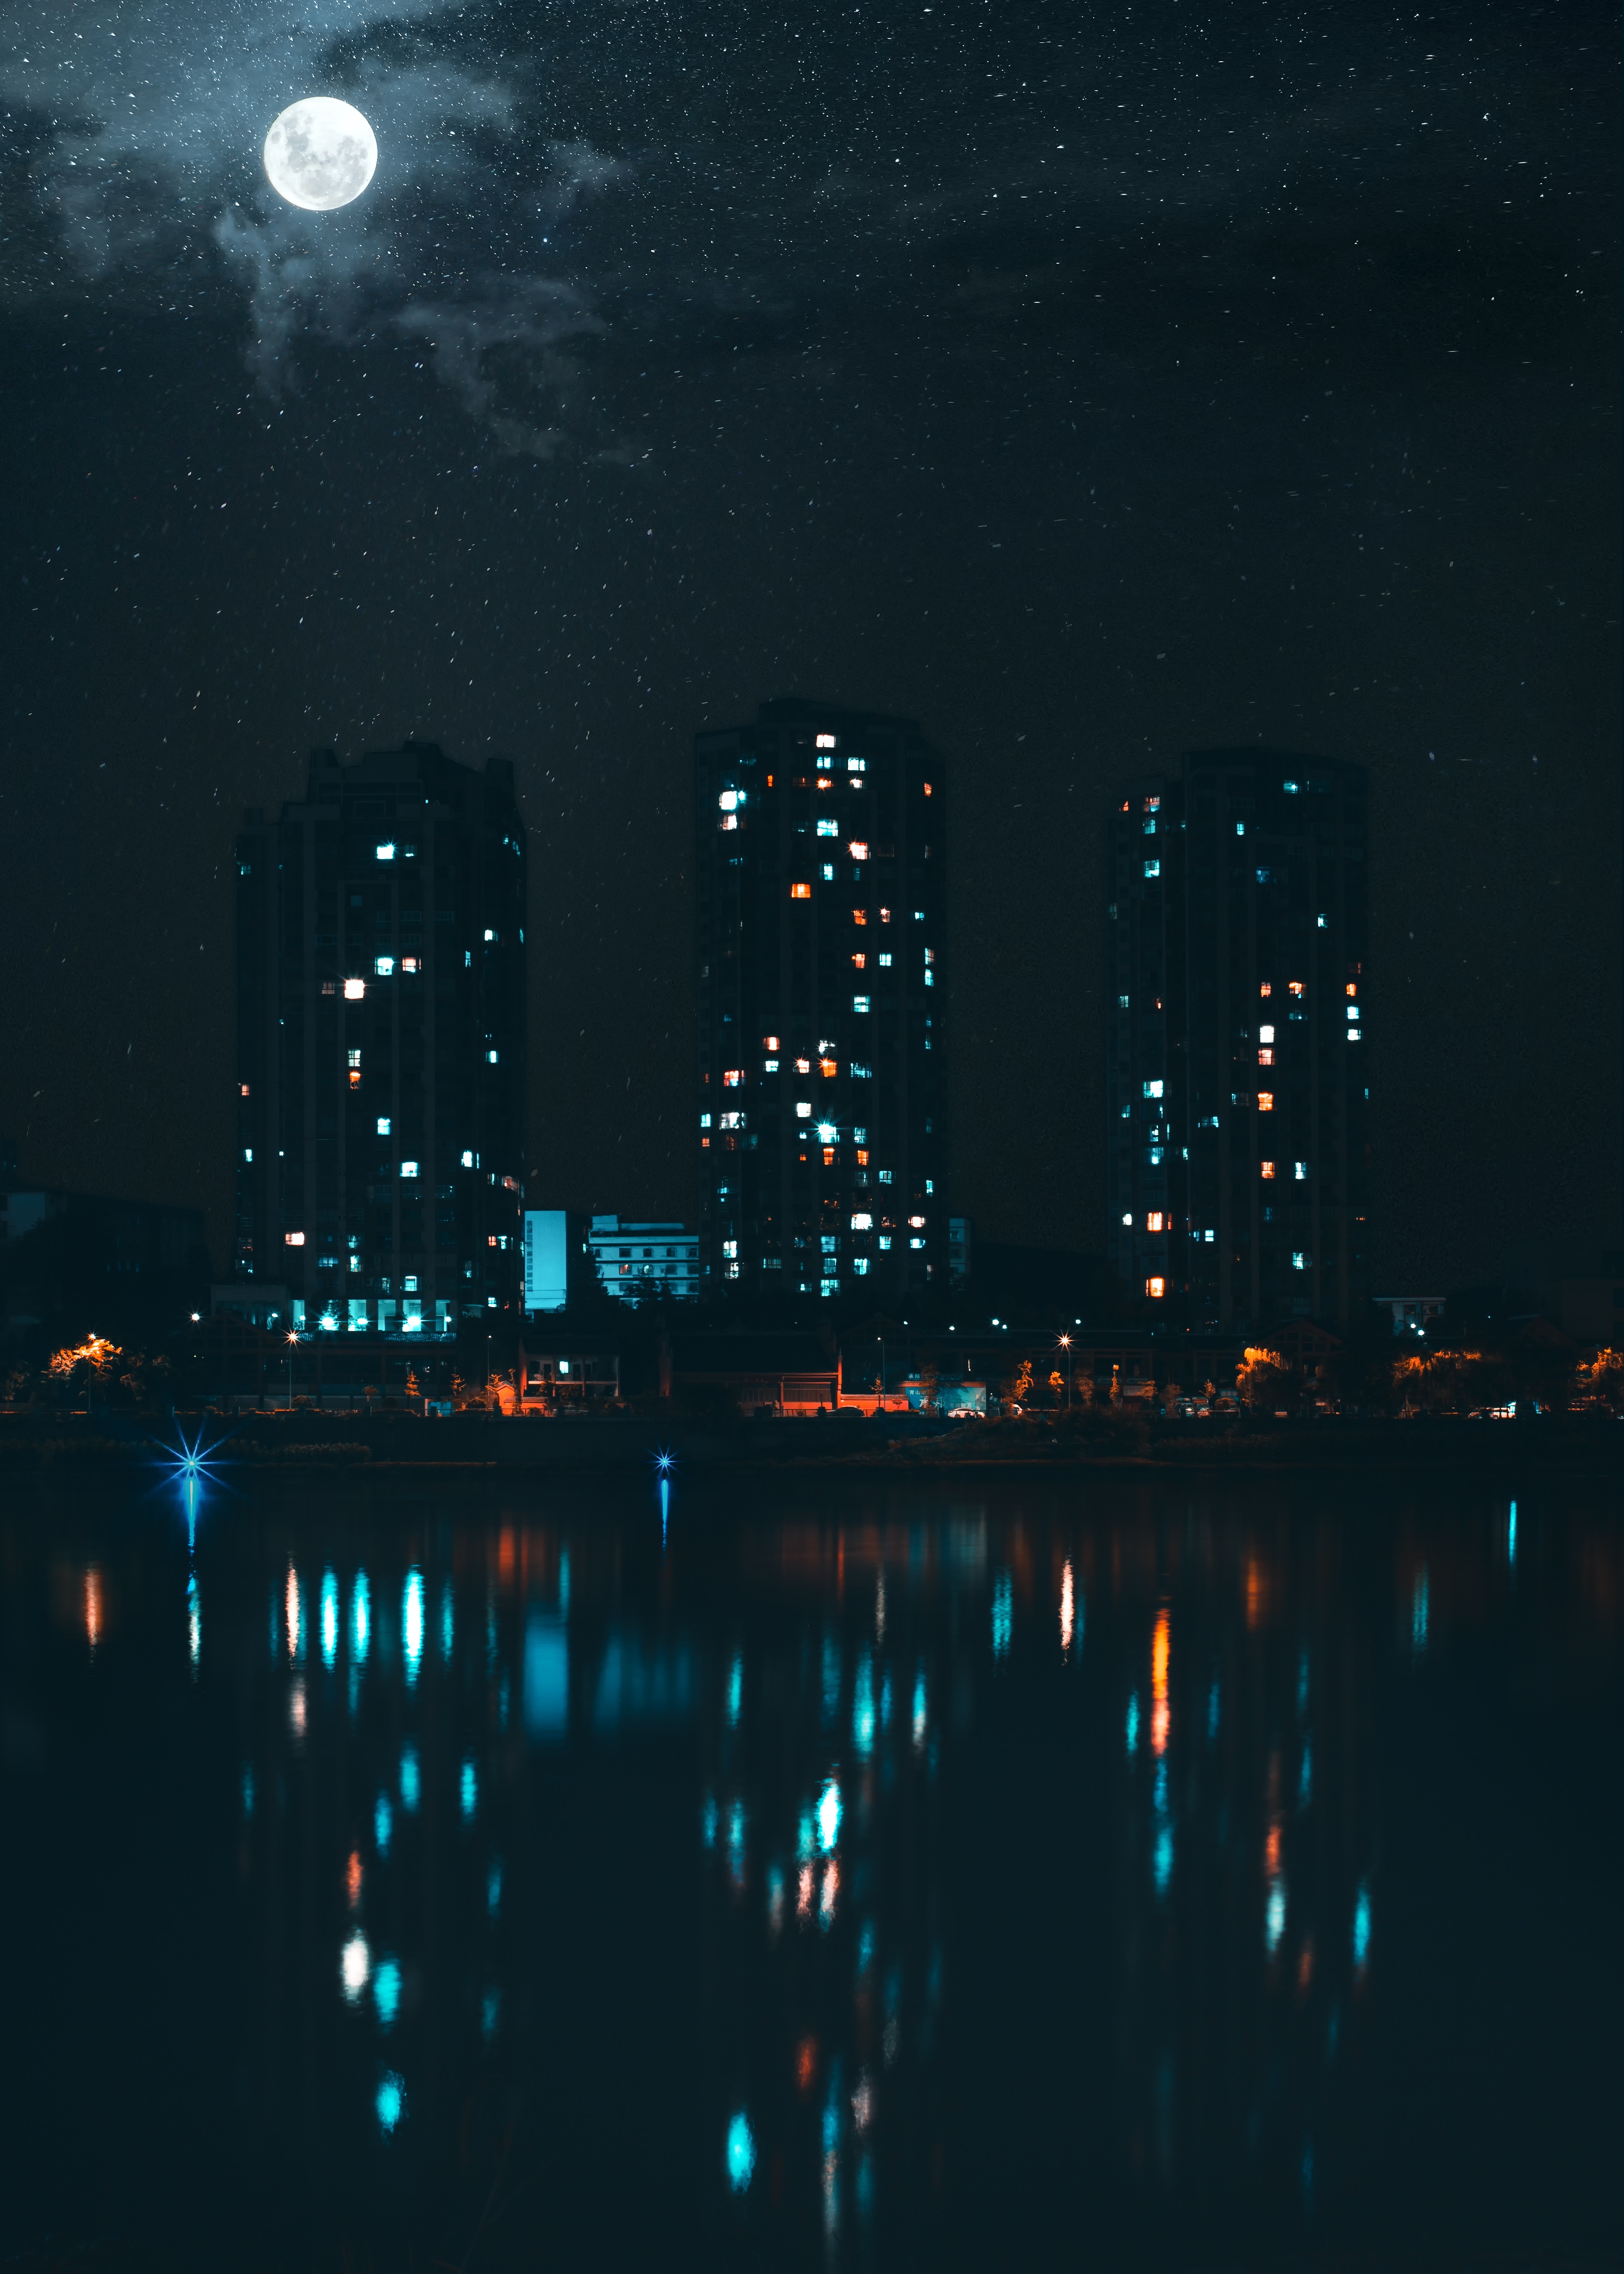 cities, moon, building, lights, night city, skyscrapers, urban landscape, cityscape Full HD